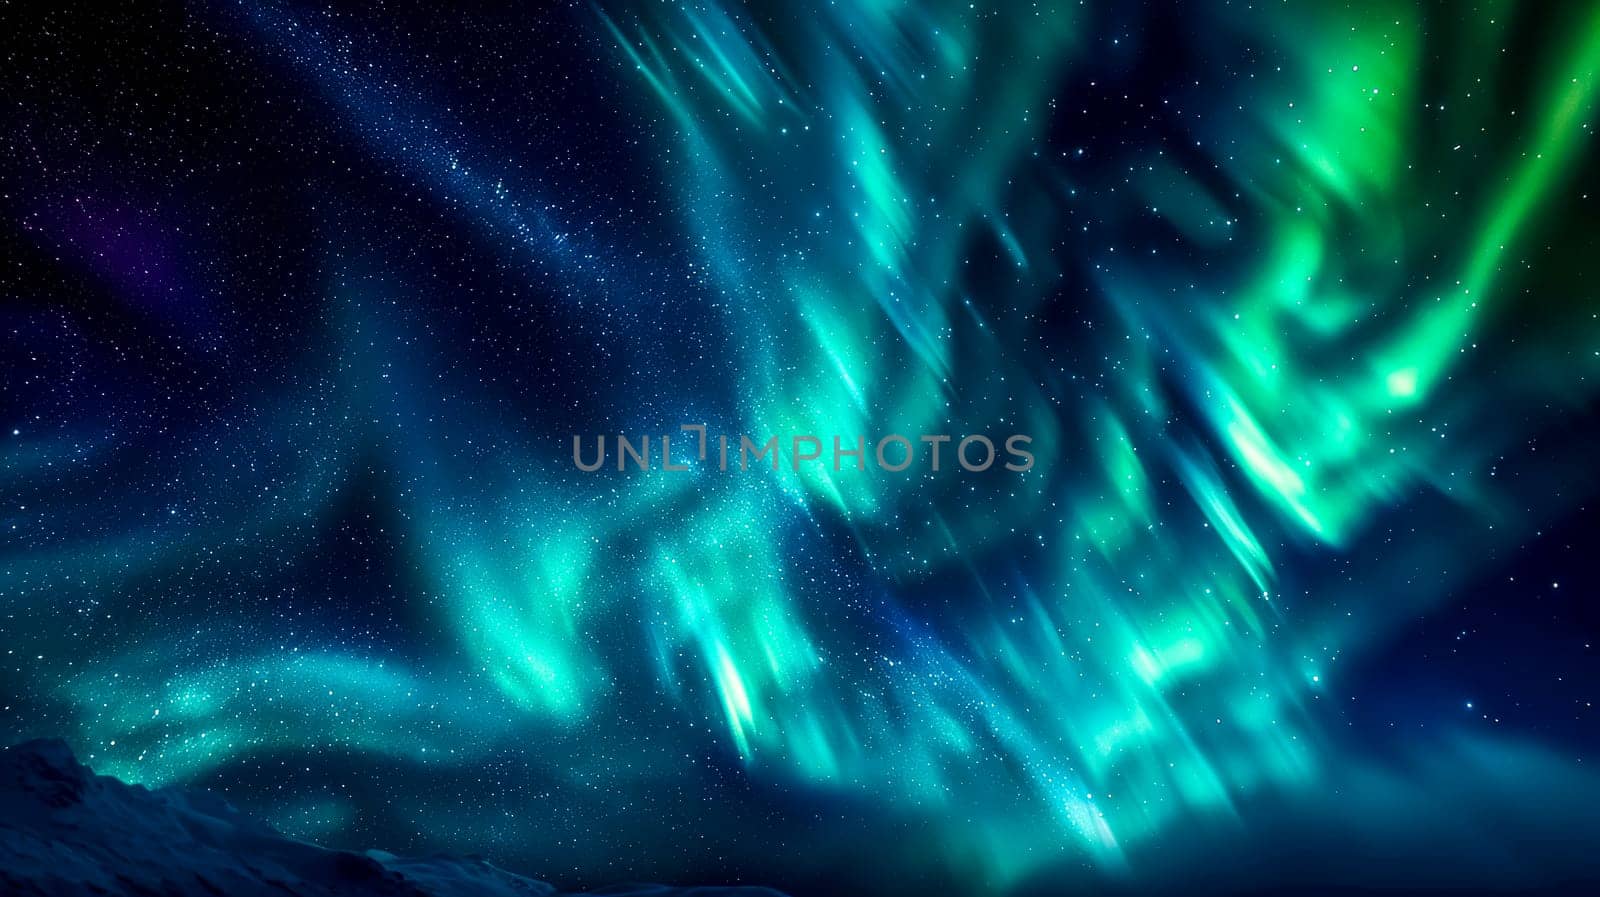 Spectacular aurora borealis lights dancing across a star-filled night sky above a frosty terrain